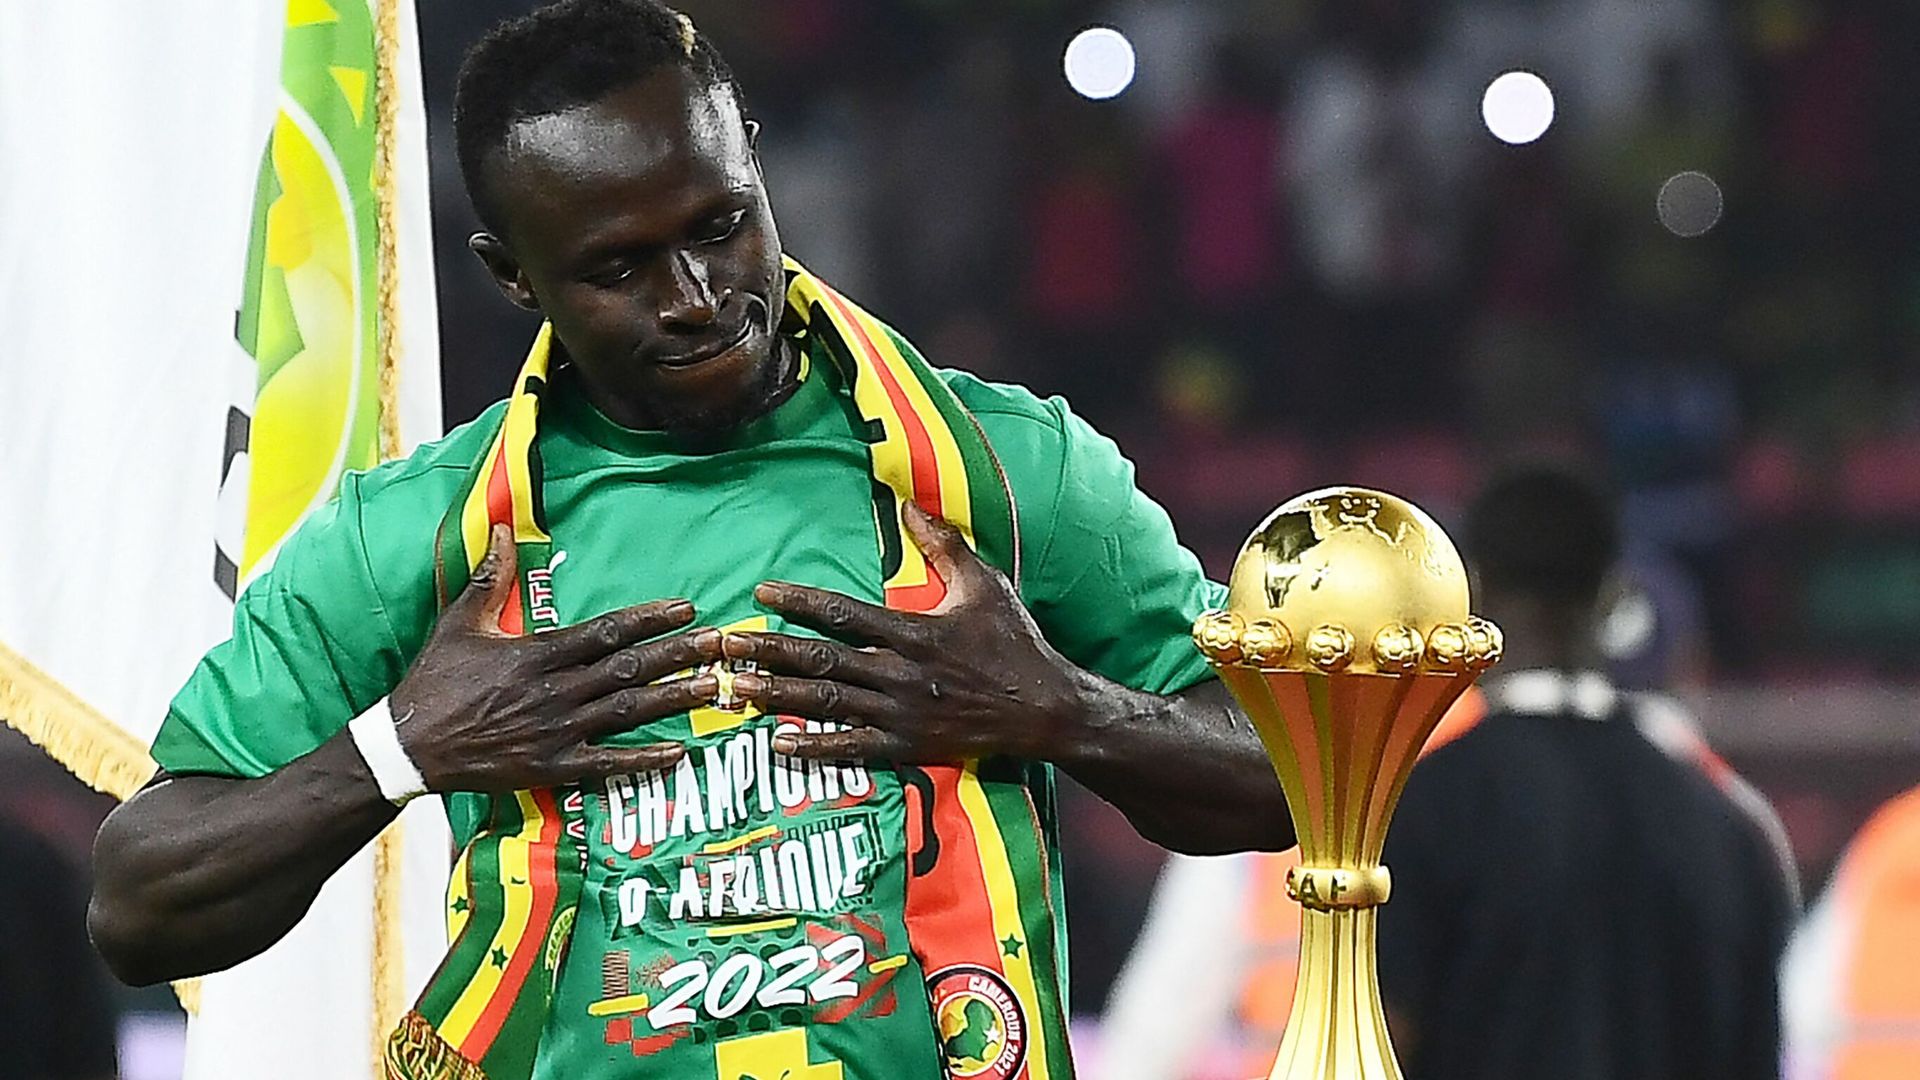 AFCON 2023: All you need to know ahead of the tournament